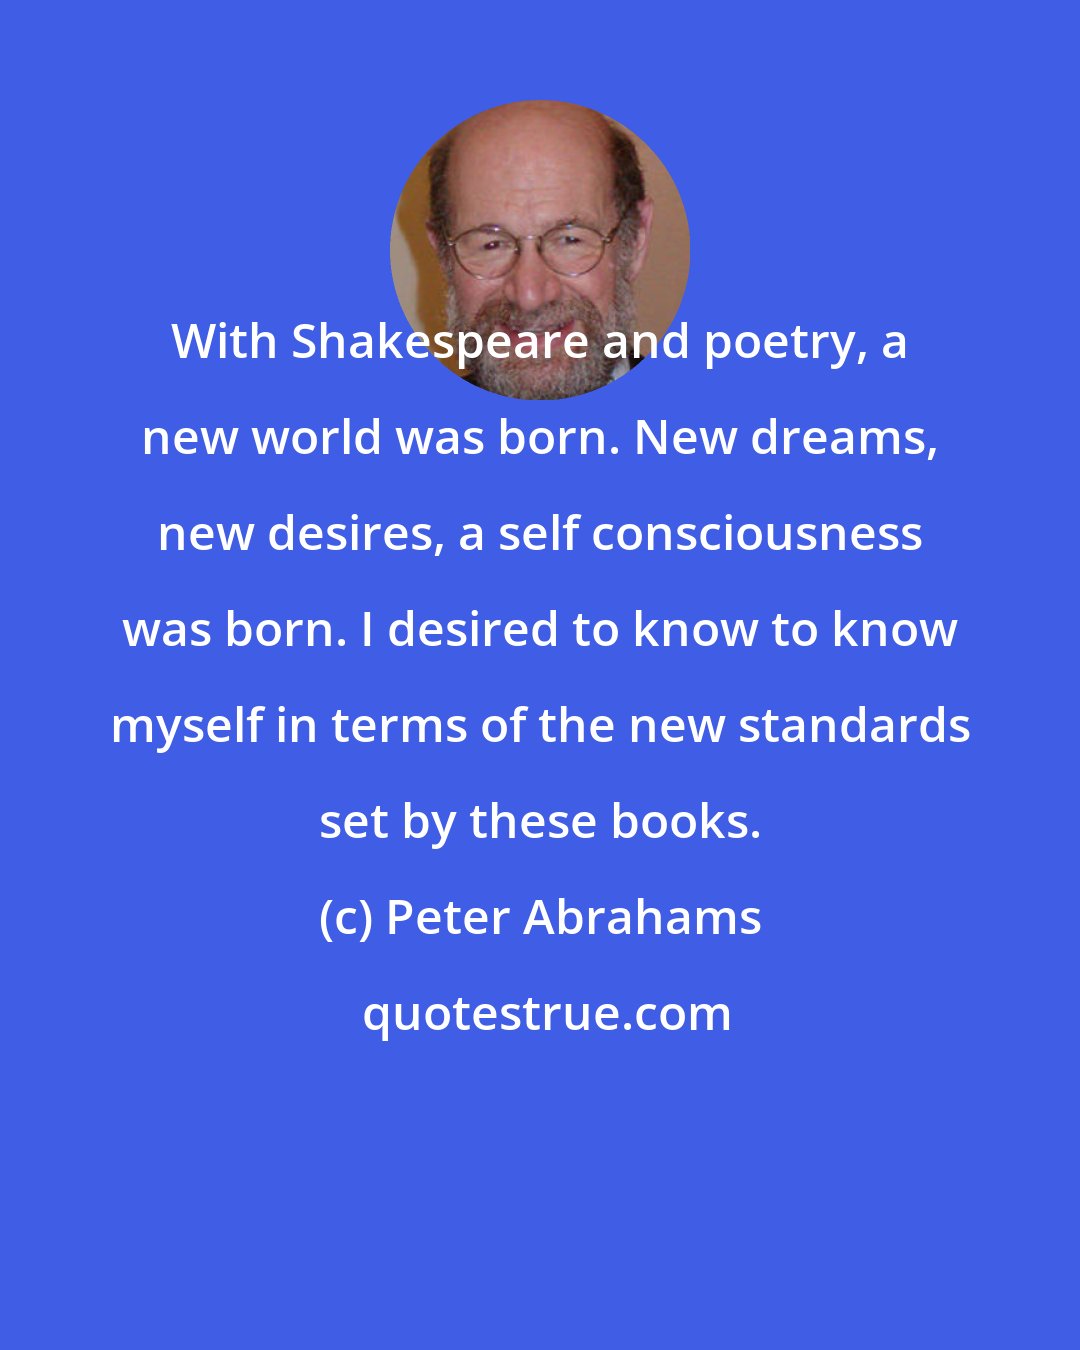 Peter Abrahams: With Shakespeare and poetry, a new world was born. New dreams, new desires, a self consciousness was born. I desired to know to know myself in terms of the new standards set by these books.